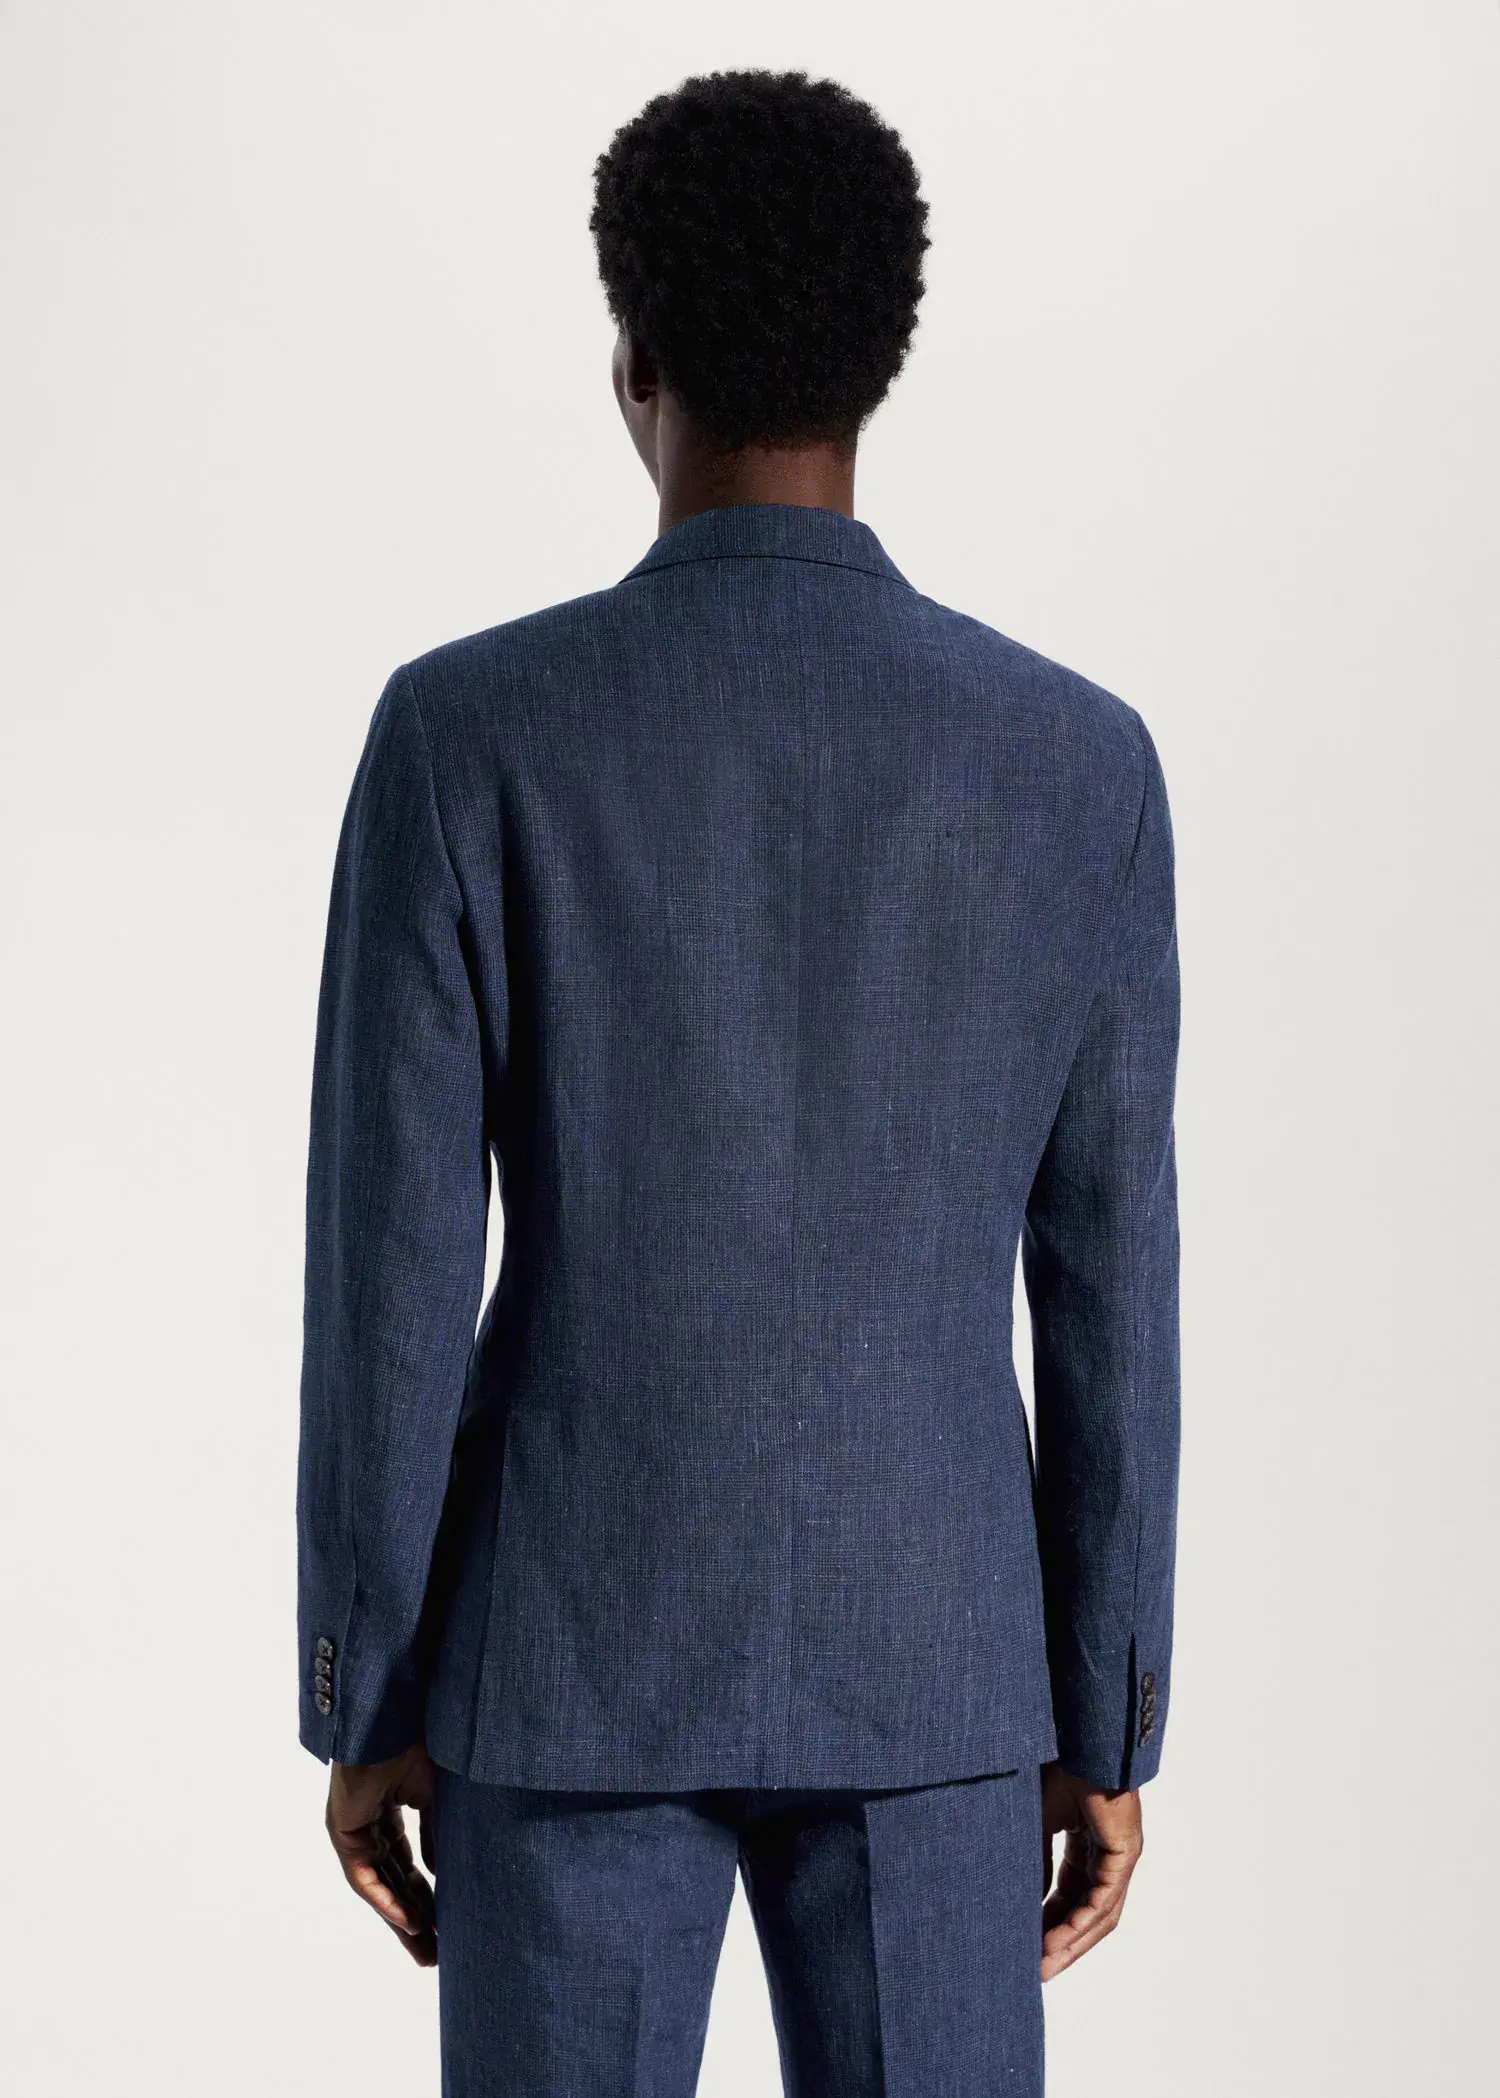 Mango Blazer suit 100% linen. a man wearing a blue suit standing in front of a white wall. 